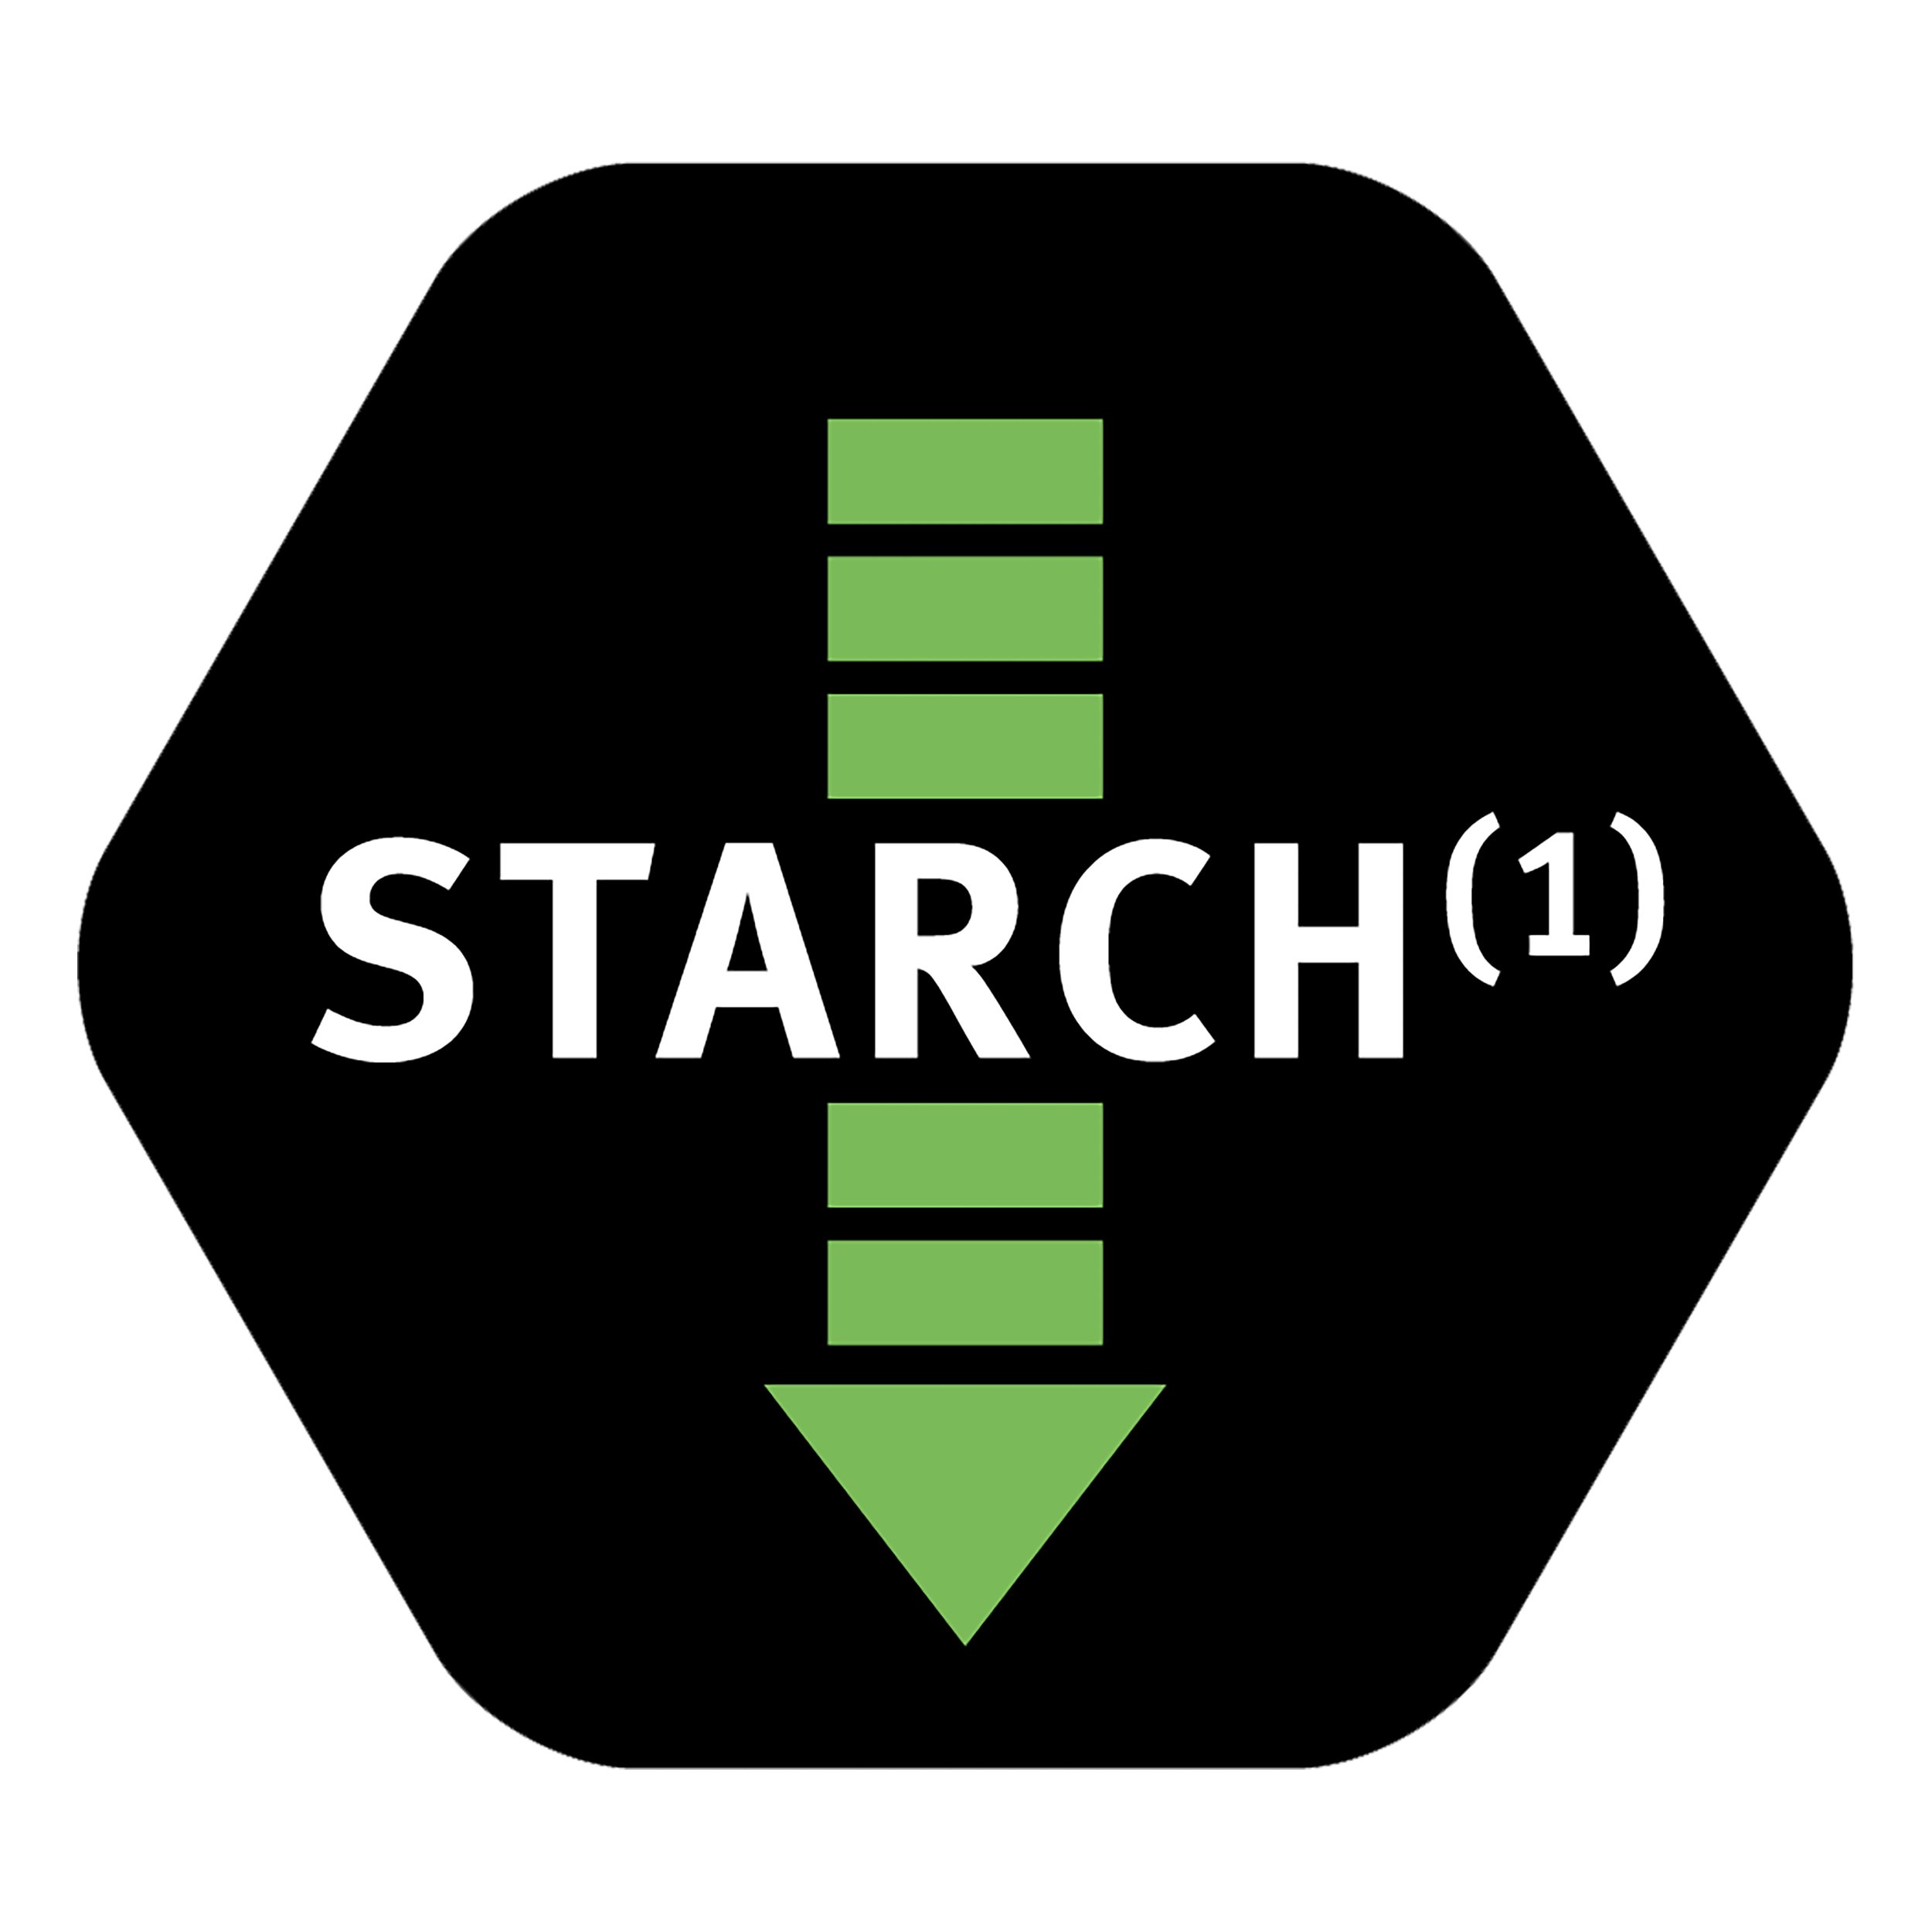 Low starch content